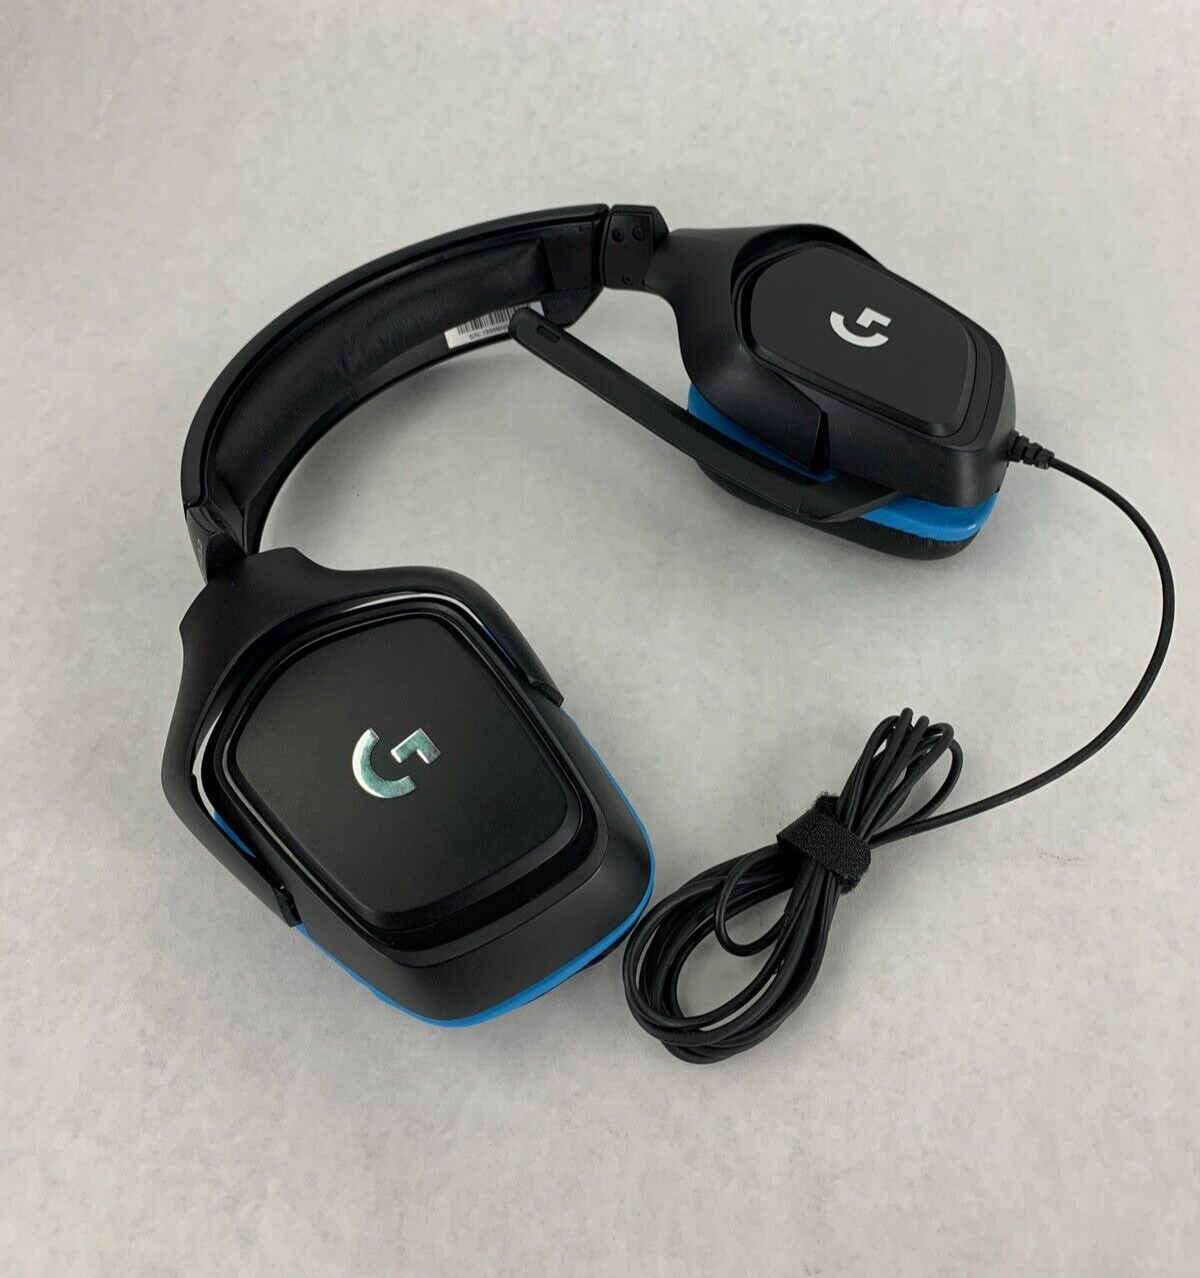 Logitech G432 3.5mm Wired Surround Sound Gaming Headset Black/Blue Tested